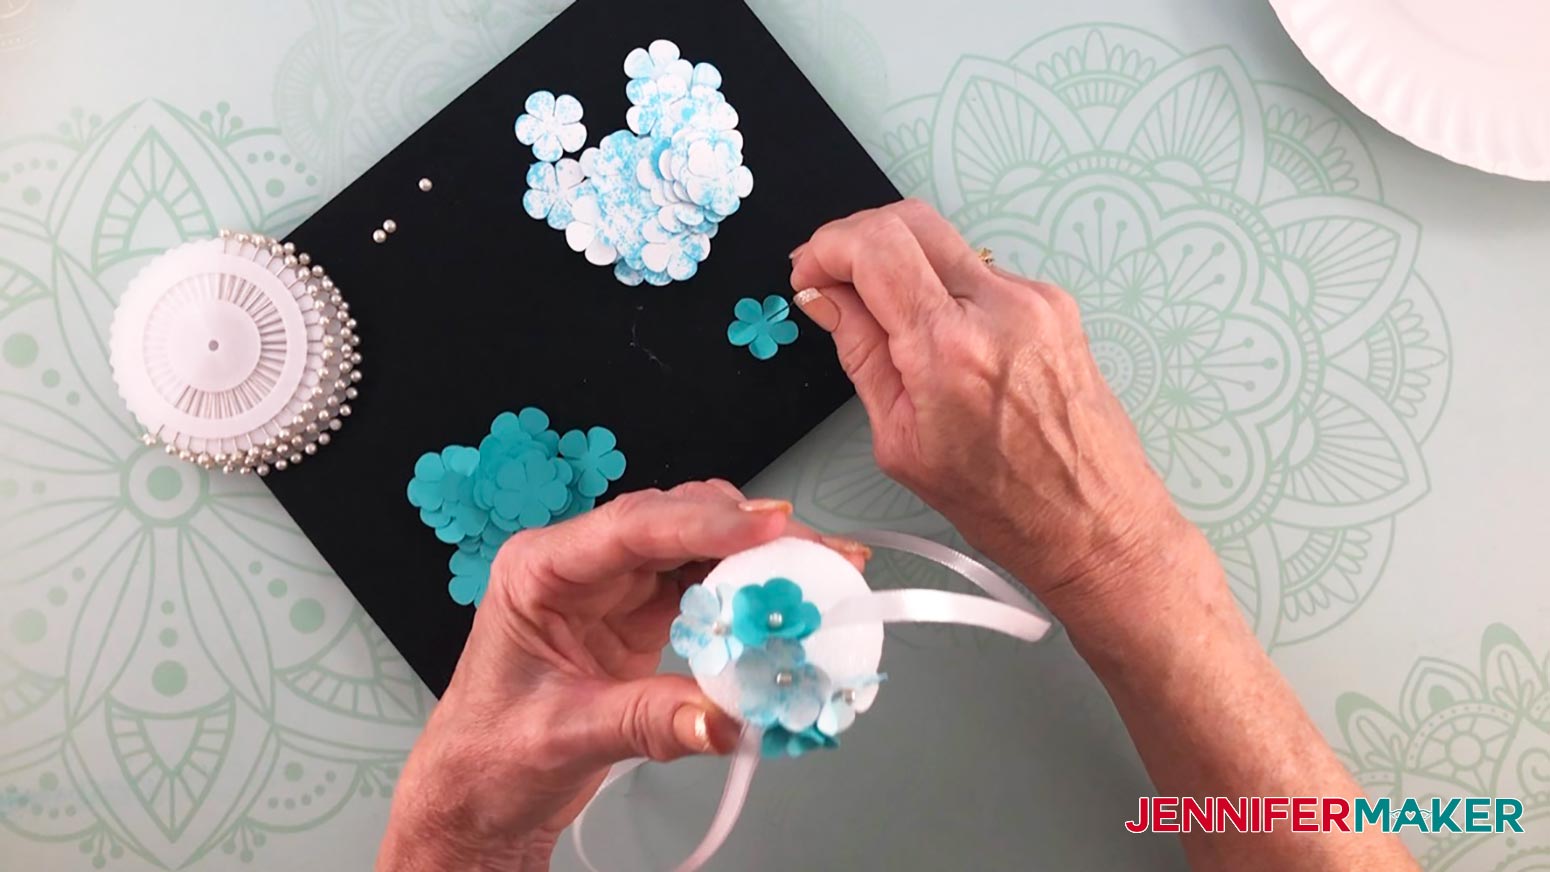 Make a paper hydrangea flower by sticking a pin into the flower